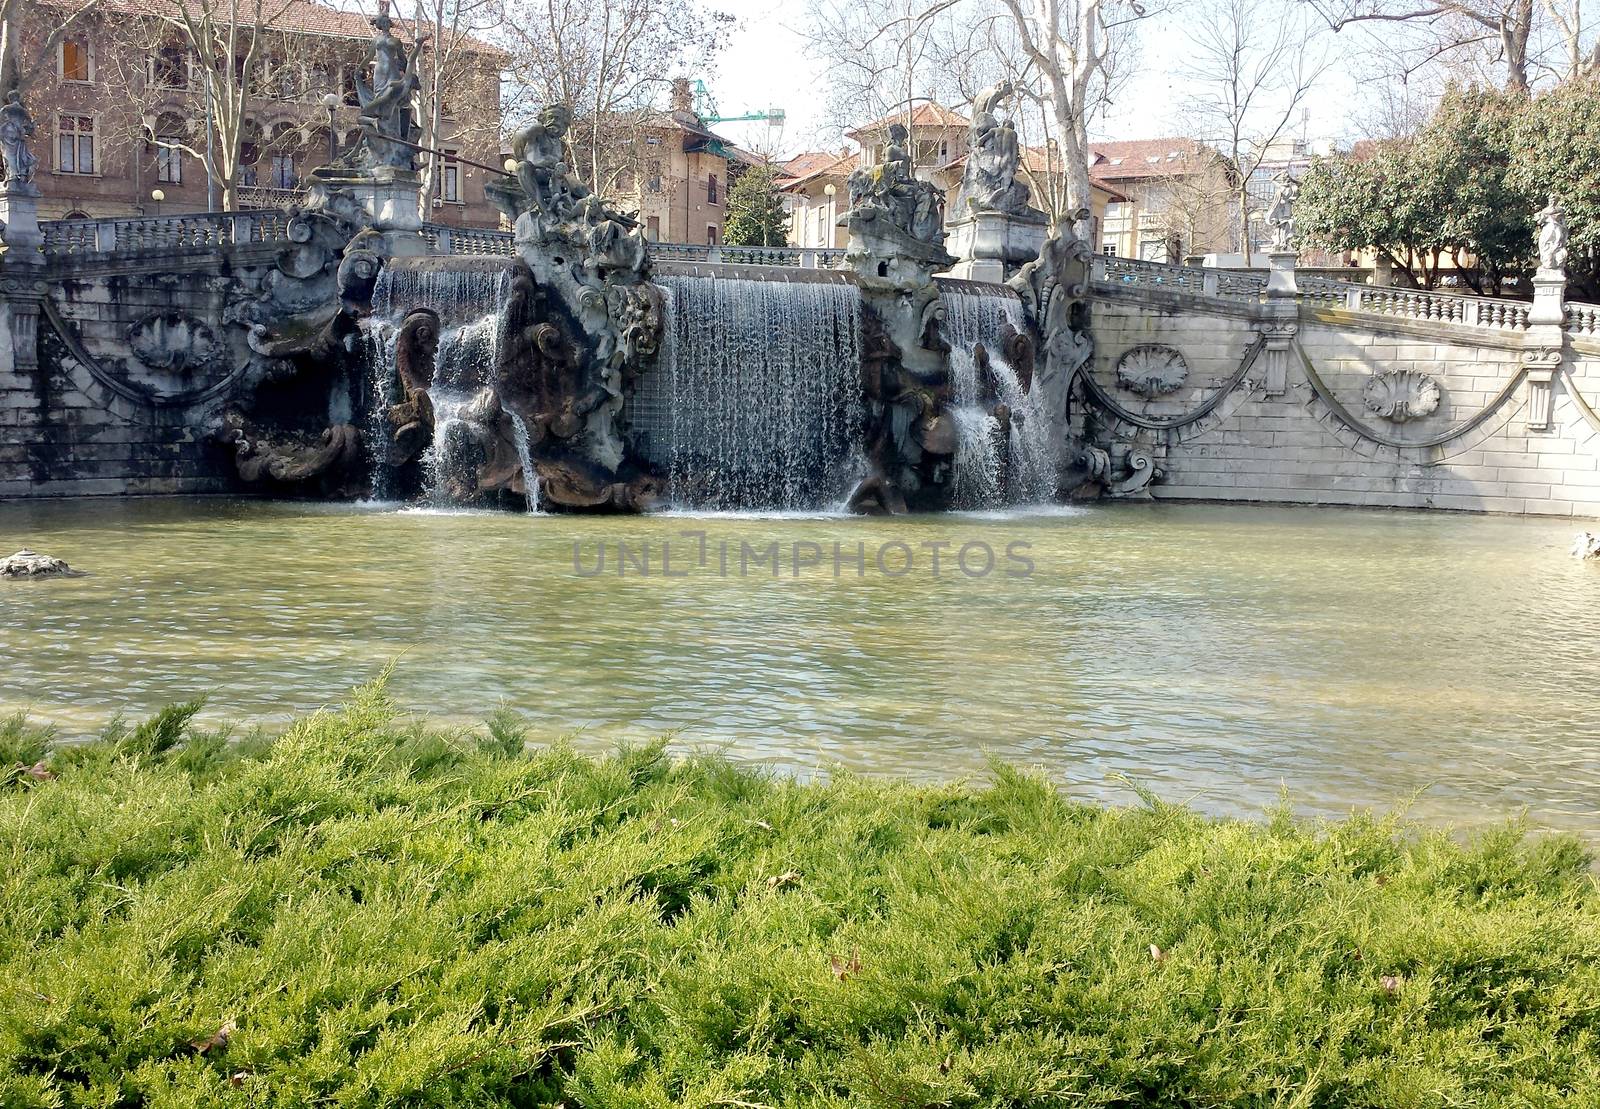 Close up to the Fountain of the Twelve Months, Turin, Italy.

Picture taken on February 20, 2014.